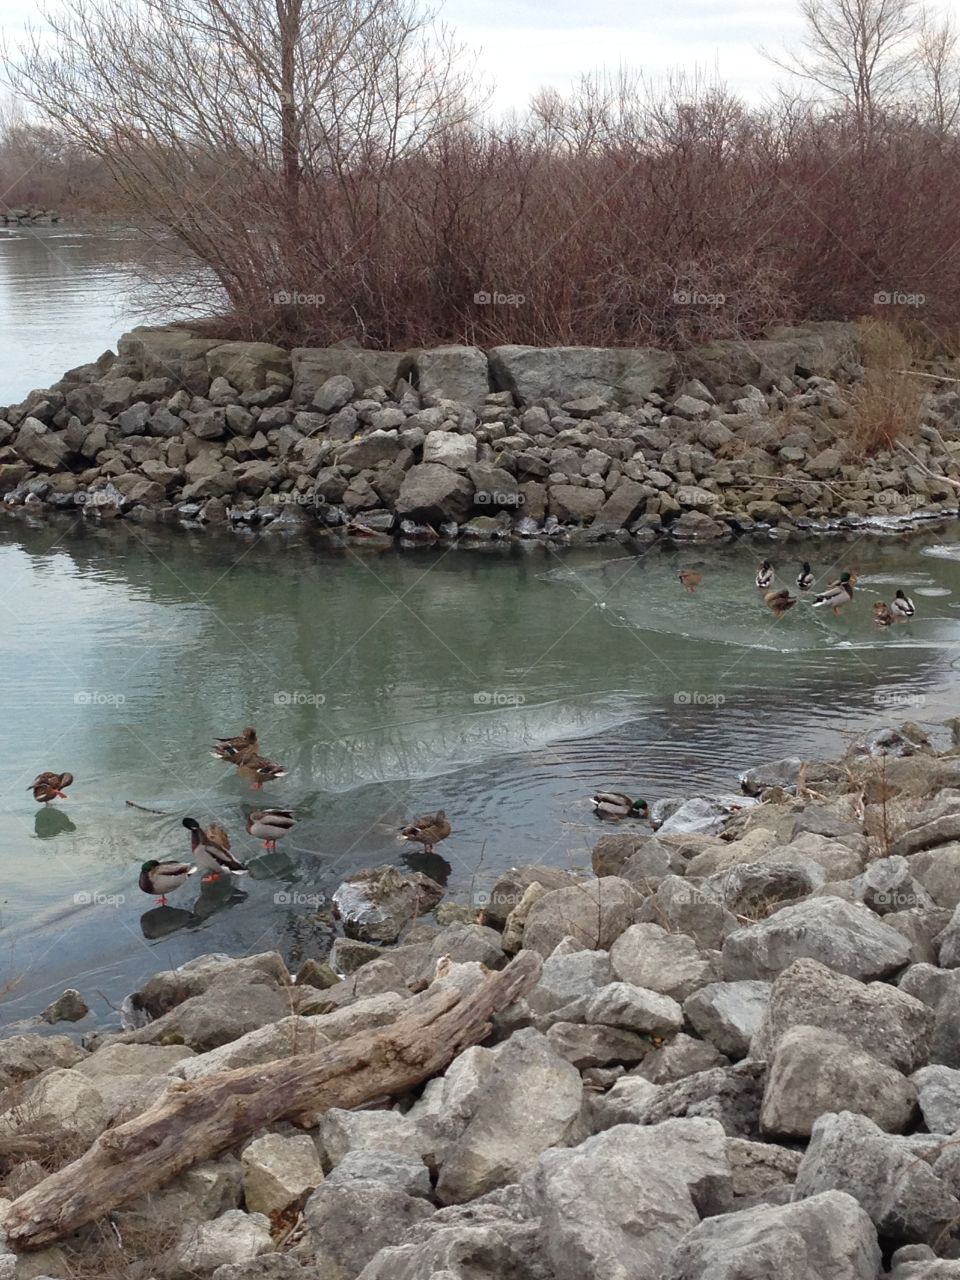 Ducks chilling on the ice